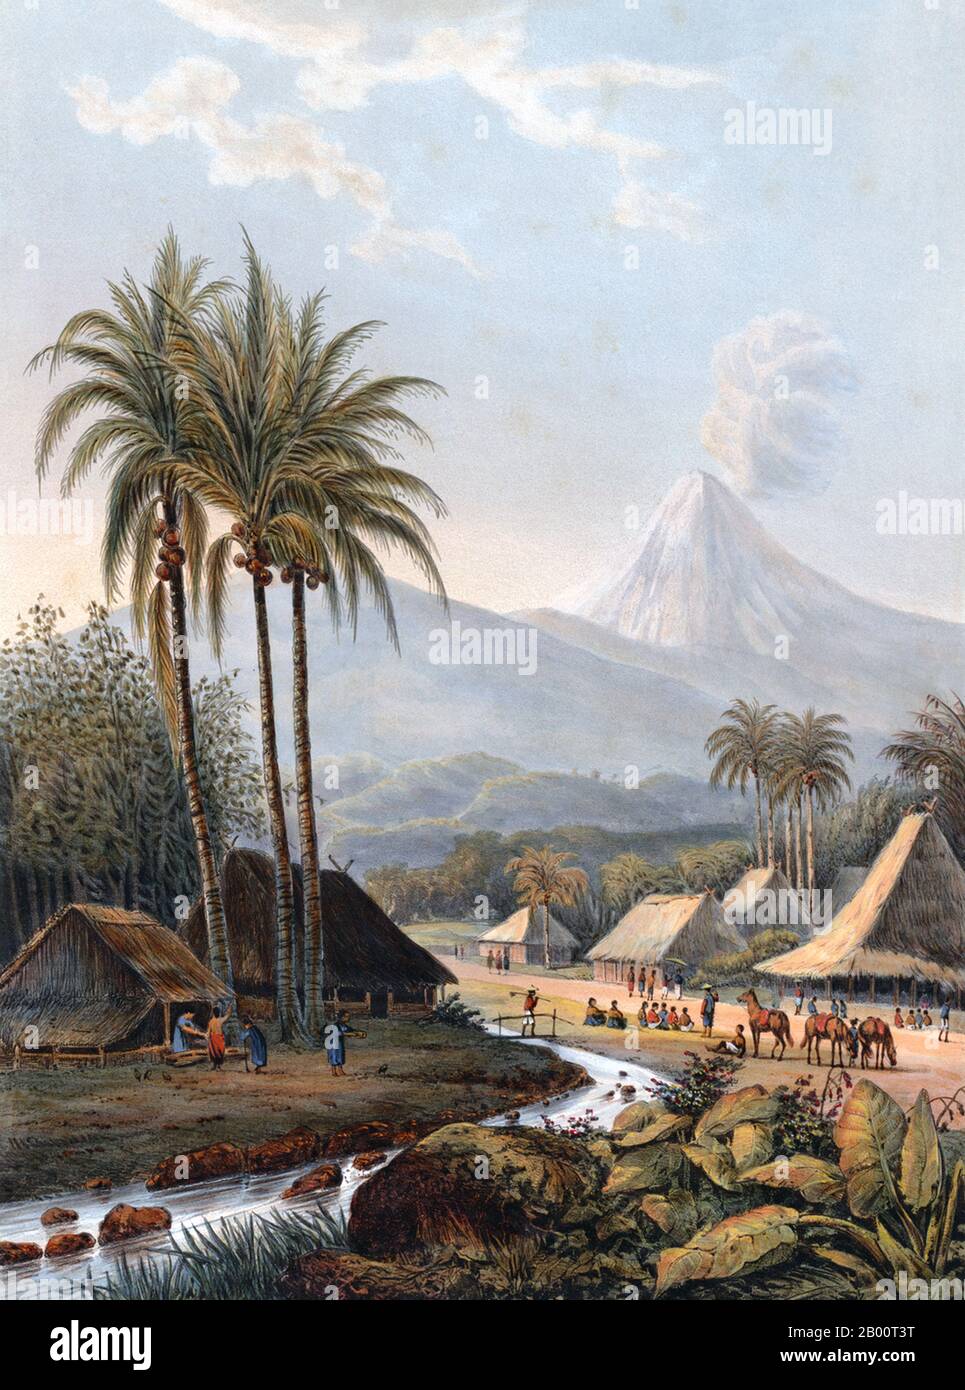 Indonesia: The Volcano Semeru (View from the Pasuruan Residence). Lithograph by Abraham Salm (1801-1876), 1872.  This coloured lithograph shows Smeroe (Semeru), the largest volcano on the island of Java. Also known as Mahameru, or the Great Mountain, the volcano erupted at least once a year during the 19th century, and since 1967 has been in a state of near-constant activity. This view from the town of Pasuruan shows a plume of smoke coming from the top of mountain. The Dutch painter Abraham Salm (1801-1876) spent 29 years in Indonesia, where he produced many dramatic landscape paintings. Stock Photo